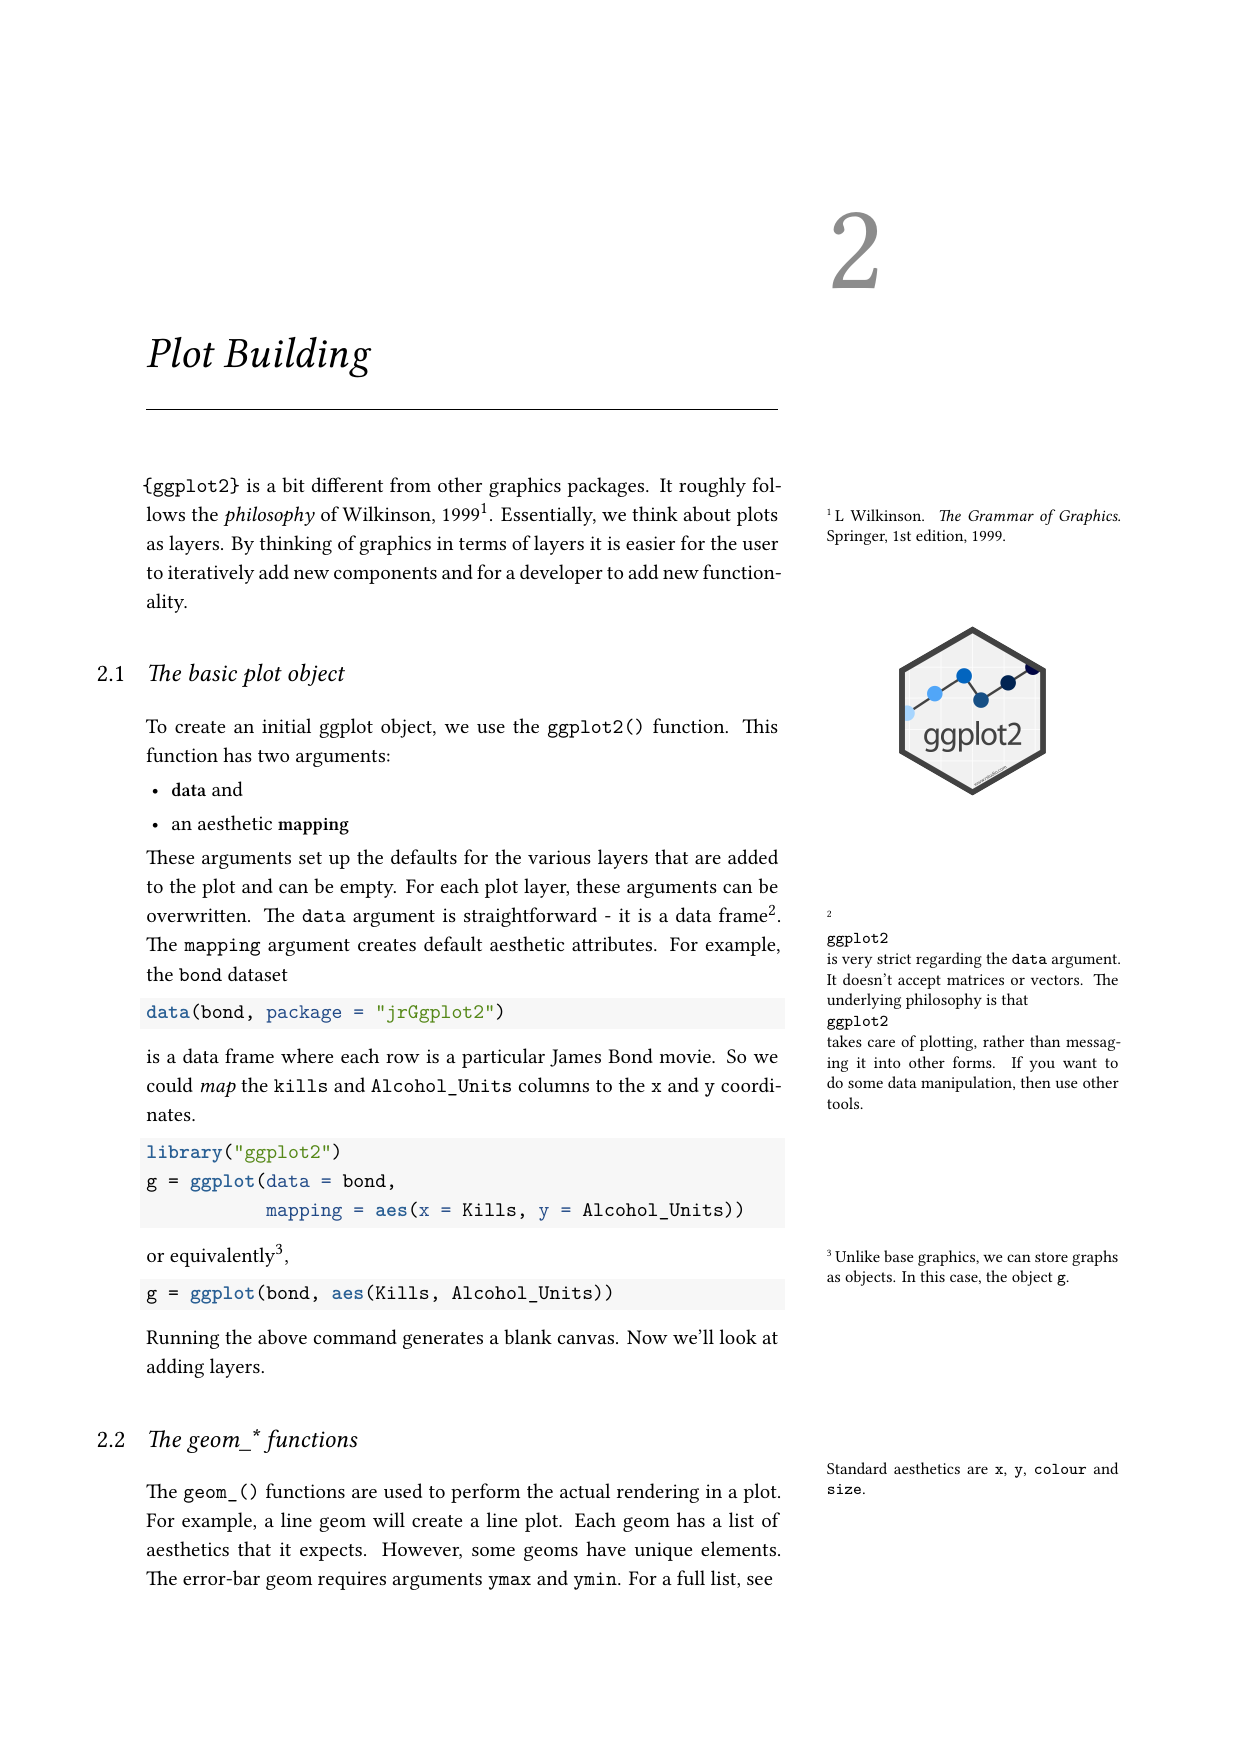 Page 3 of example course material for Advanced Graphics with R